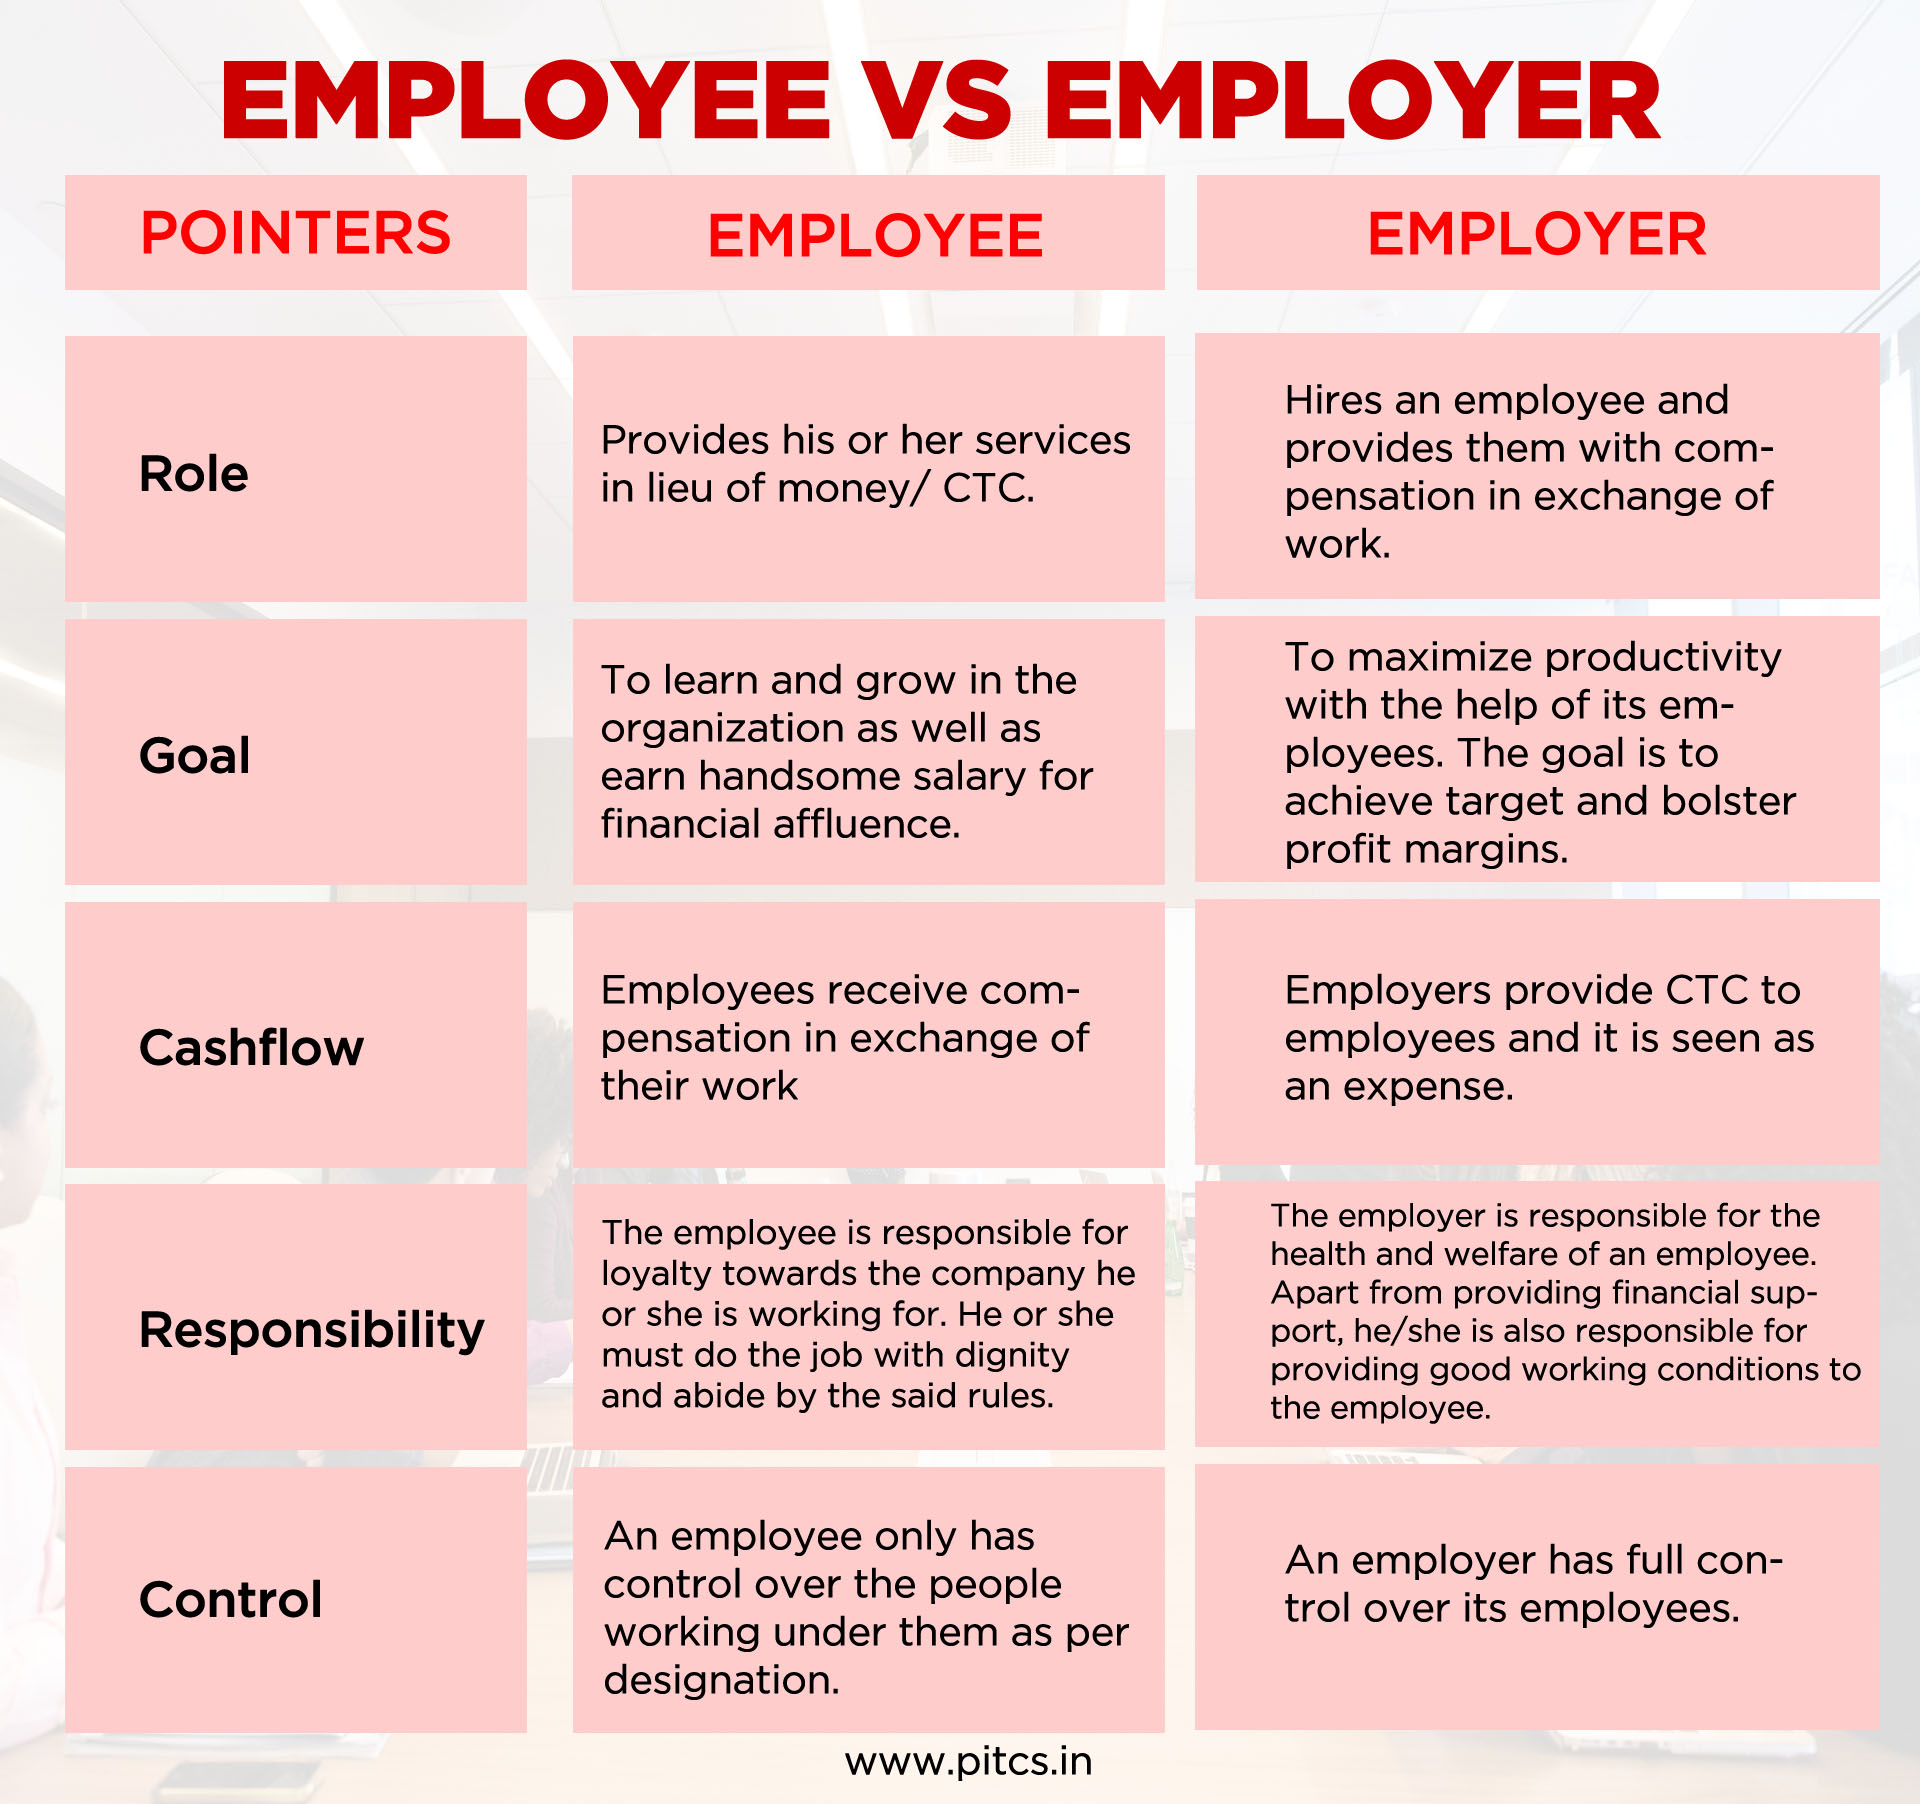 What is the difference between employee and employer